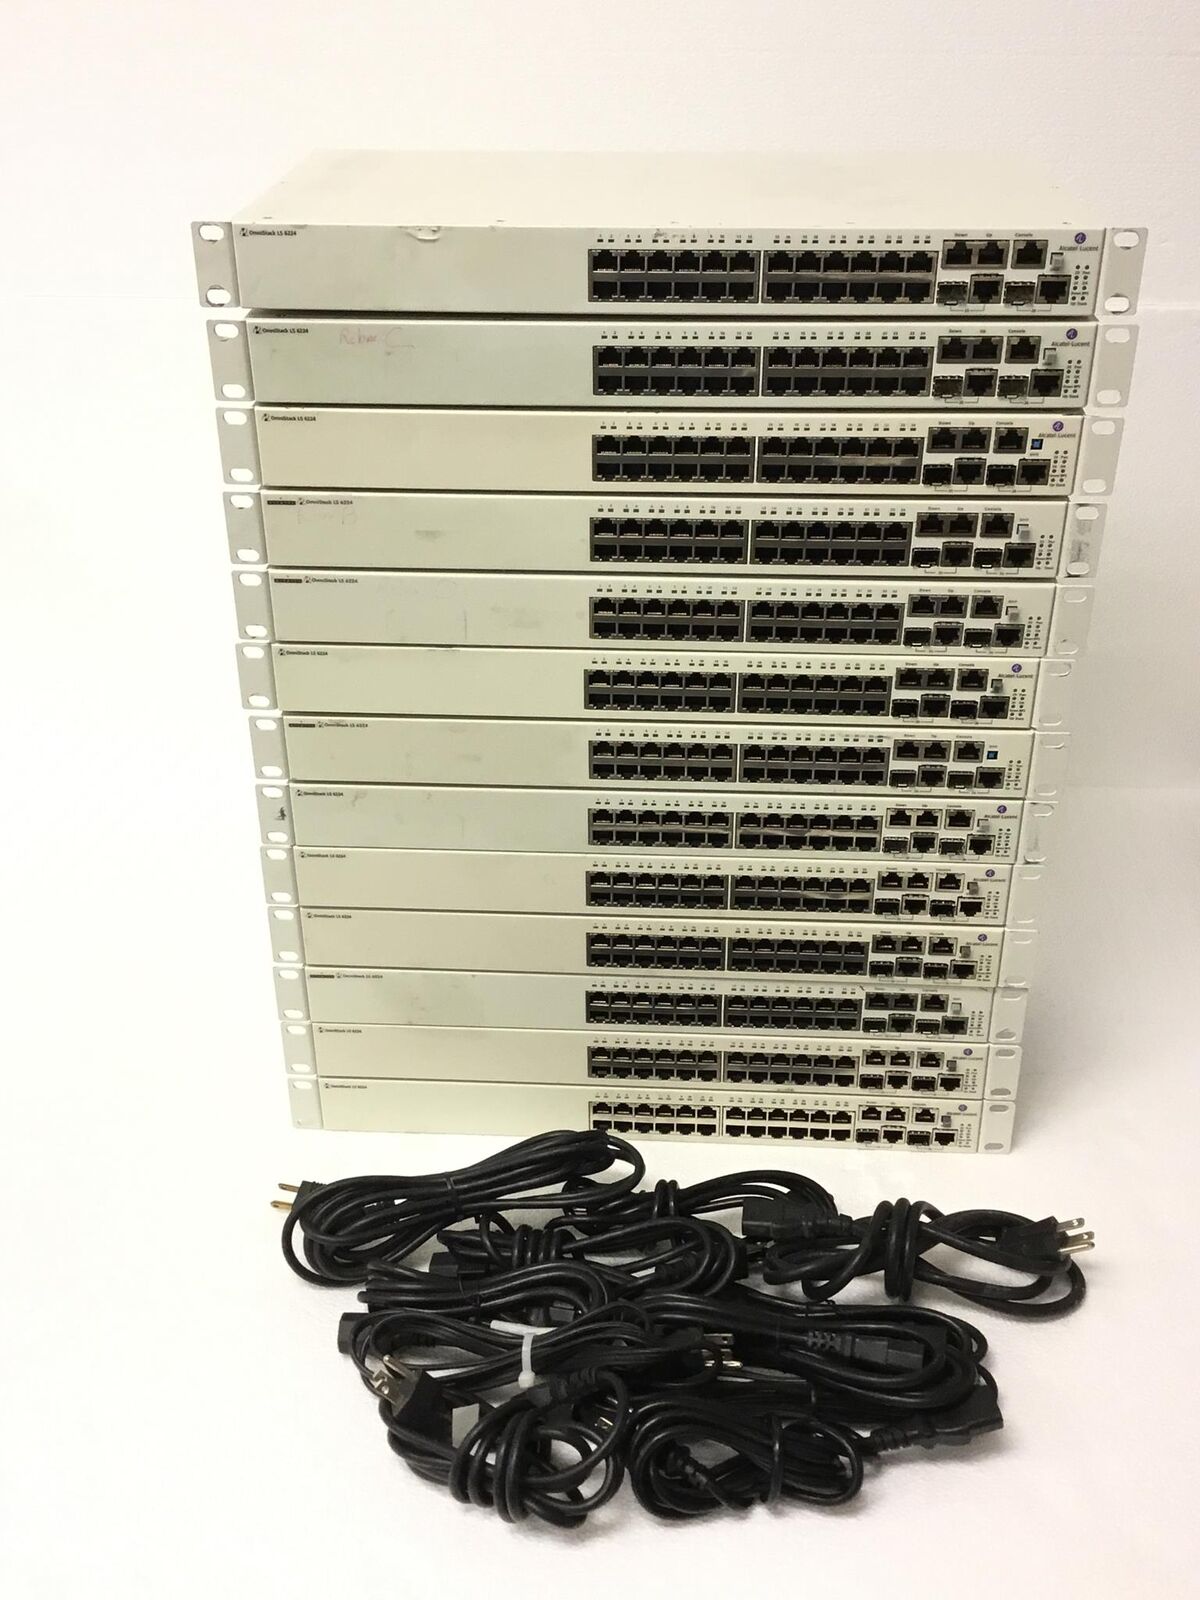 13x ALCATEL LUCENT Omni Stack LS 6224 POE Network Switch w/Rack Ears 